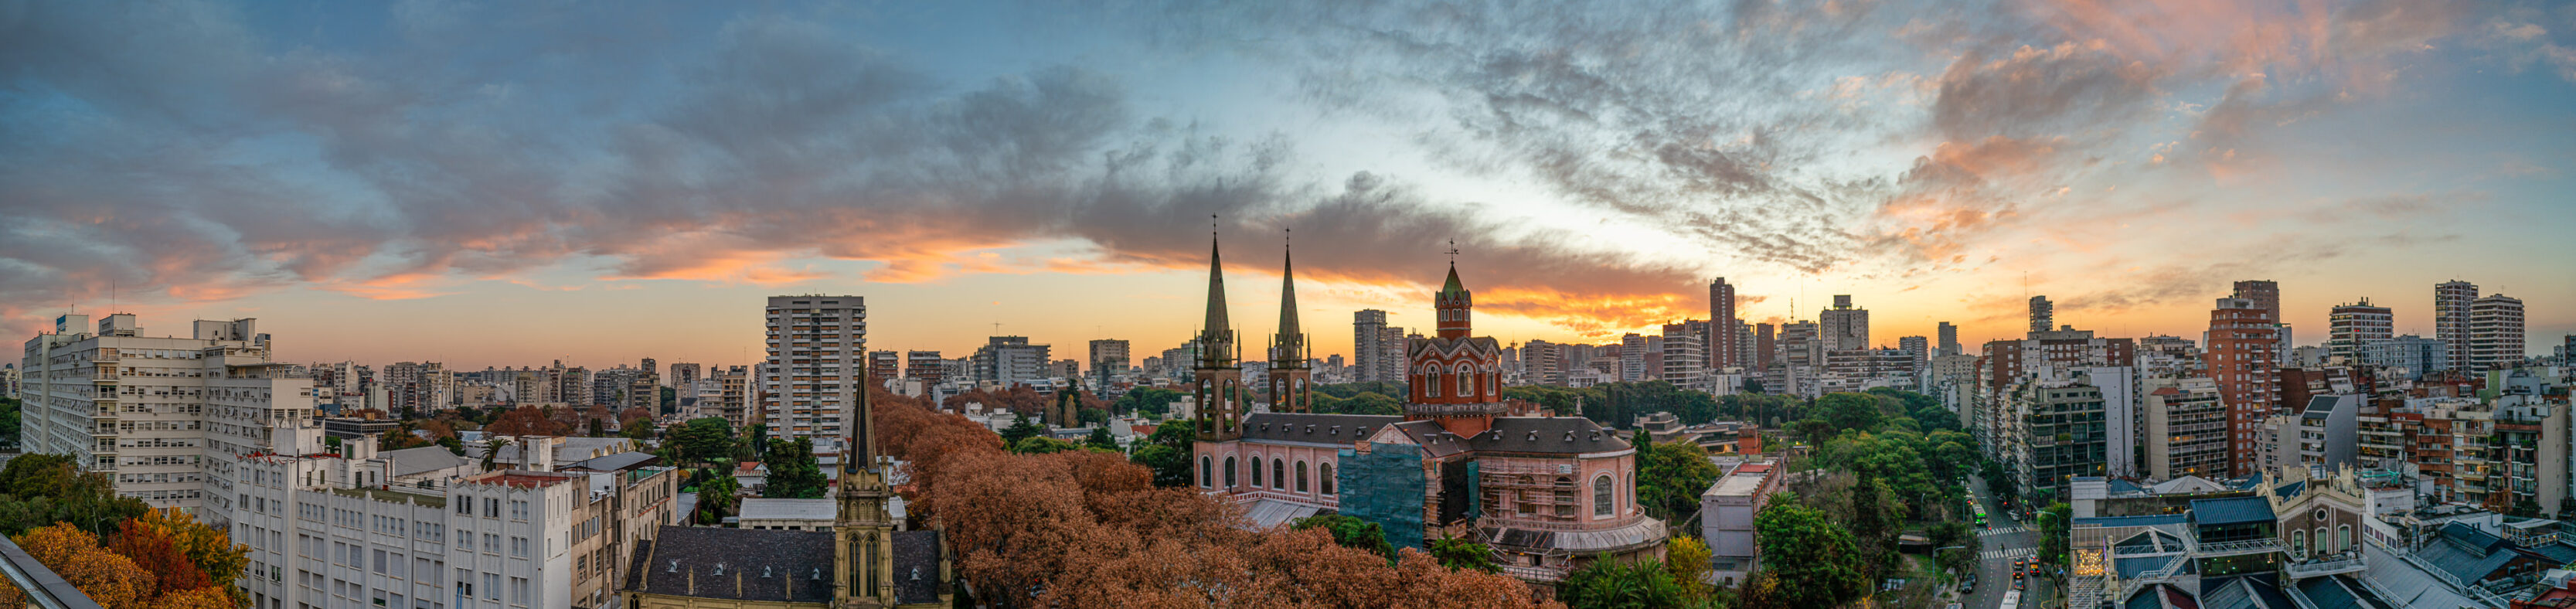 Sunset Over Buenos Aires